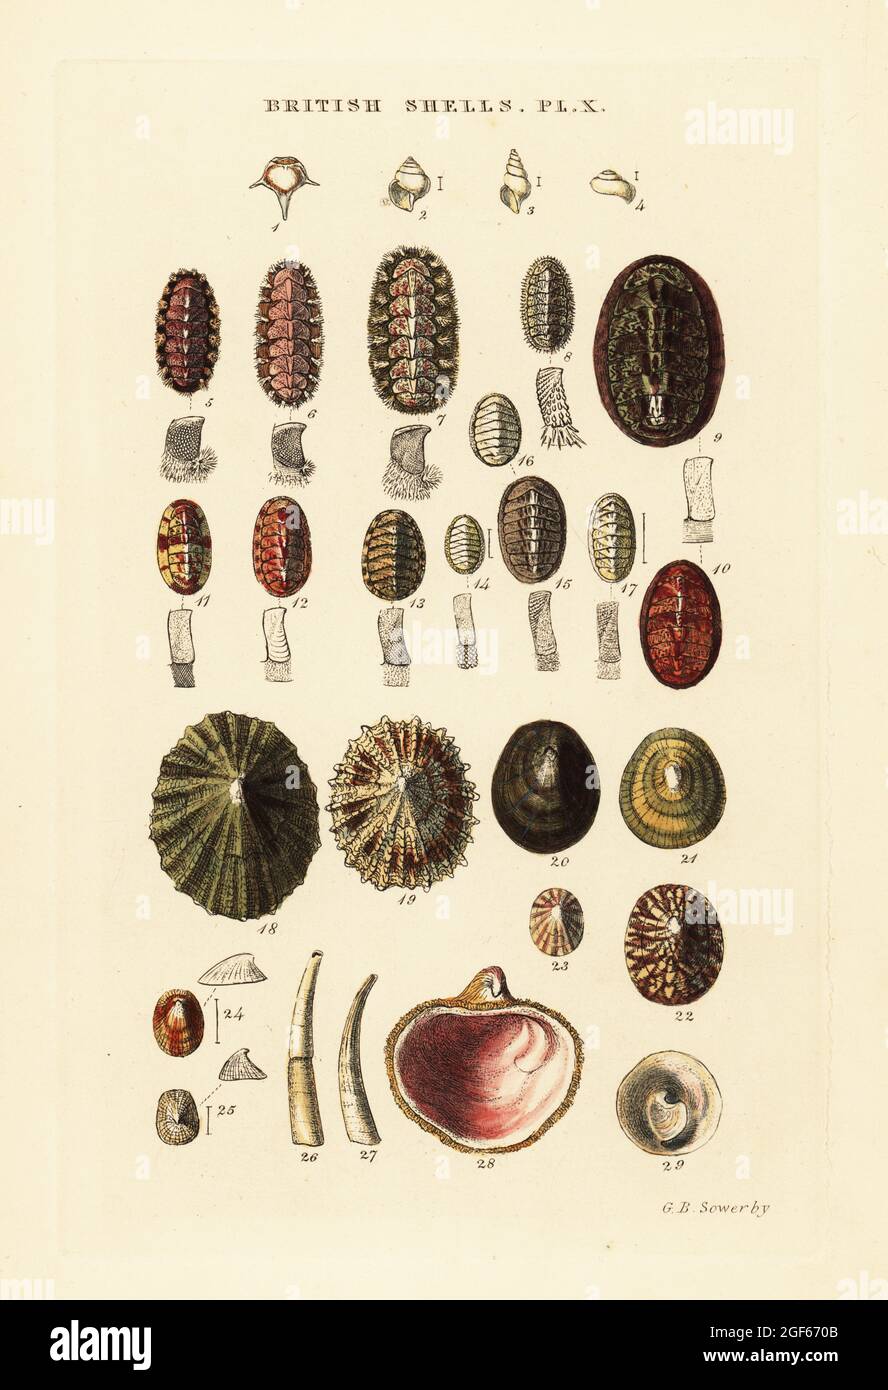 Sea cradles or coat-of-mail shells, Chiton, limpet, Patella, Spirialis, Acmaea, Dentalium, etc. Handcoloured copperplate engraving by George Brettingham Sowerby from his own Illustrated Index of British Shells, Sowerby and Simpkin, Marshall & Co., London, 1859. George Brettingham Sowerby II (1812-1884), British naturalist, illustrator, and conchologist. Stock Photo